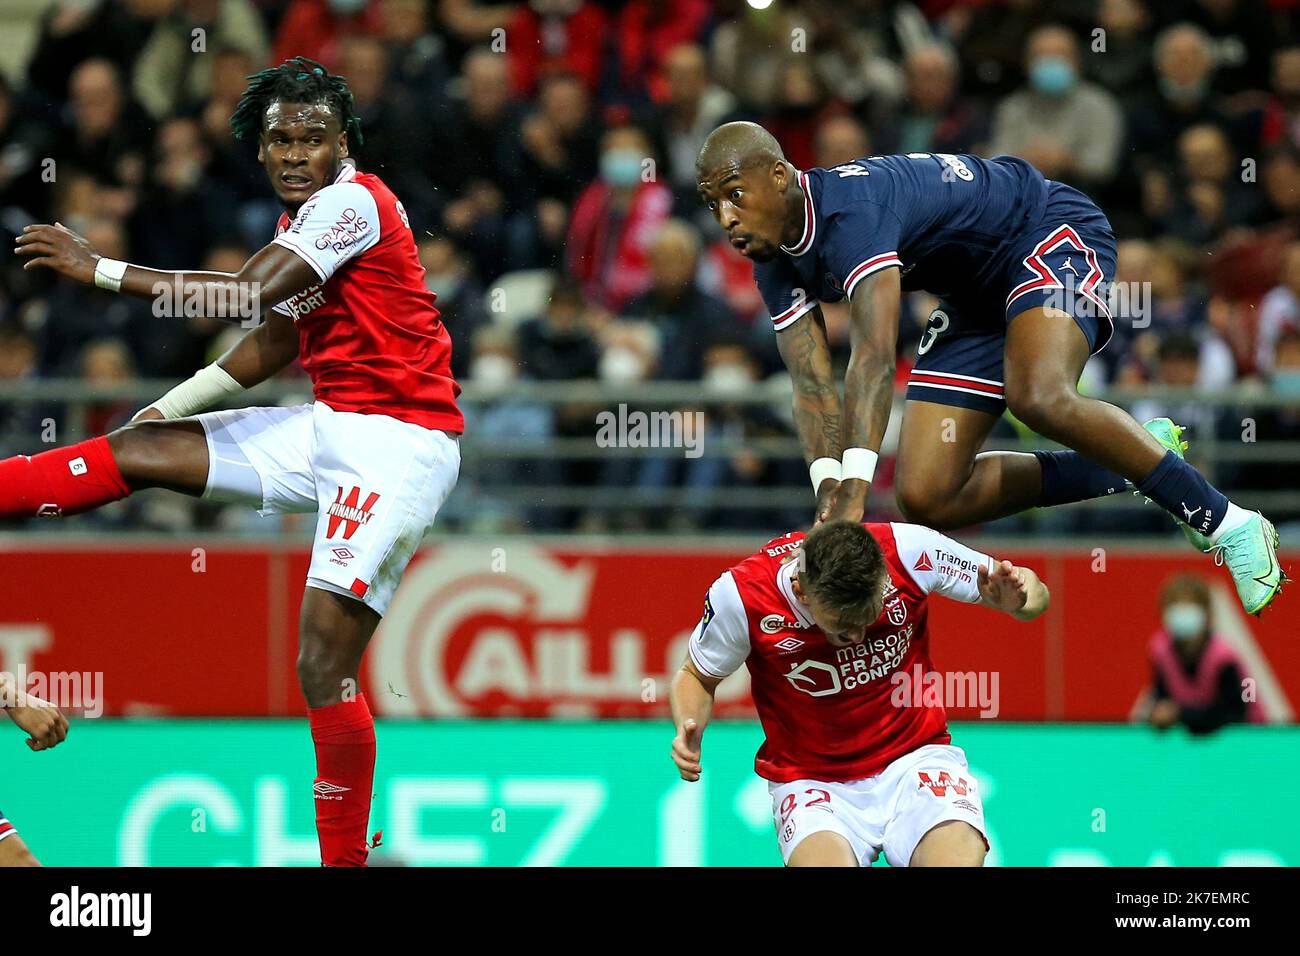 ©Christophe Petit Tesson/MAXPPP - 29/08/2021 ; REIMS ; FRANCE - Paris Saint Germain's Presnel Kimpembe (R) in action against Thomas Foket (R) of Reims during the French Ligue 1 soccer match between Stade de Reims and Paris Saint Germain in Reims, France, on August 29, 2021. Stock Photo